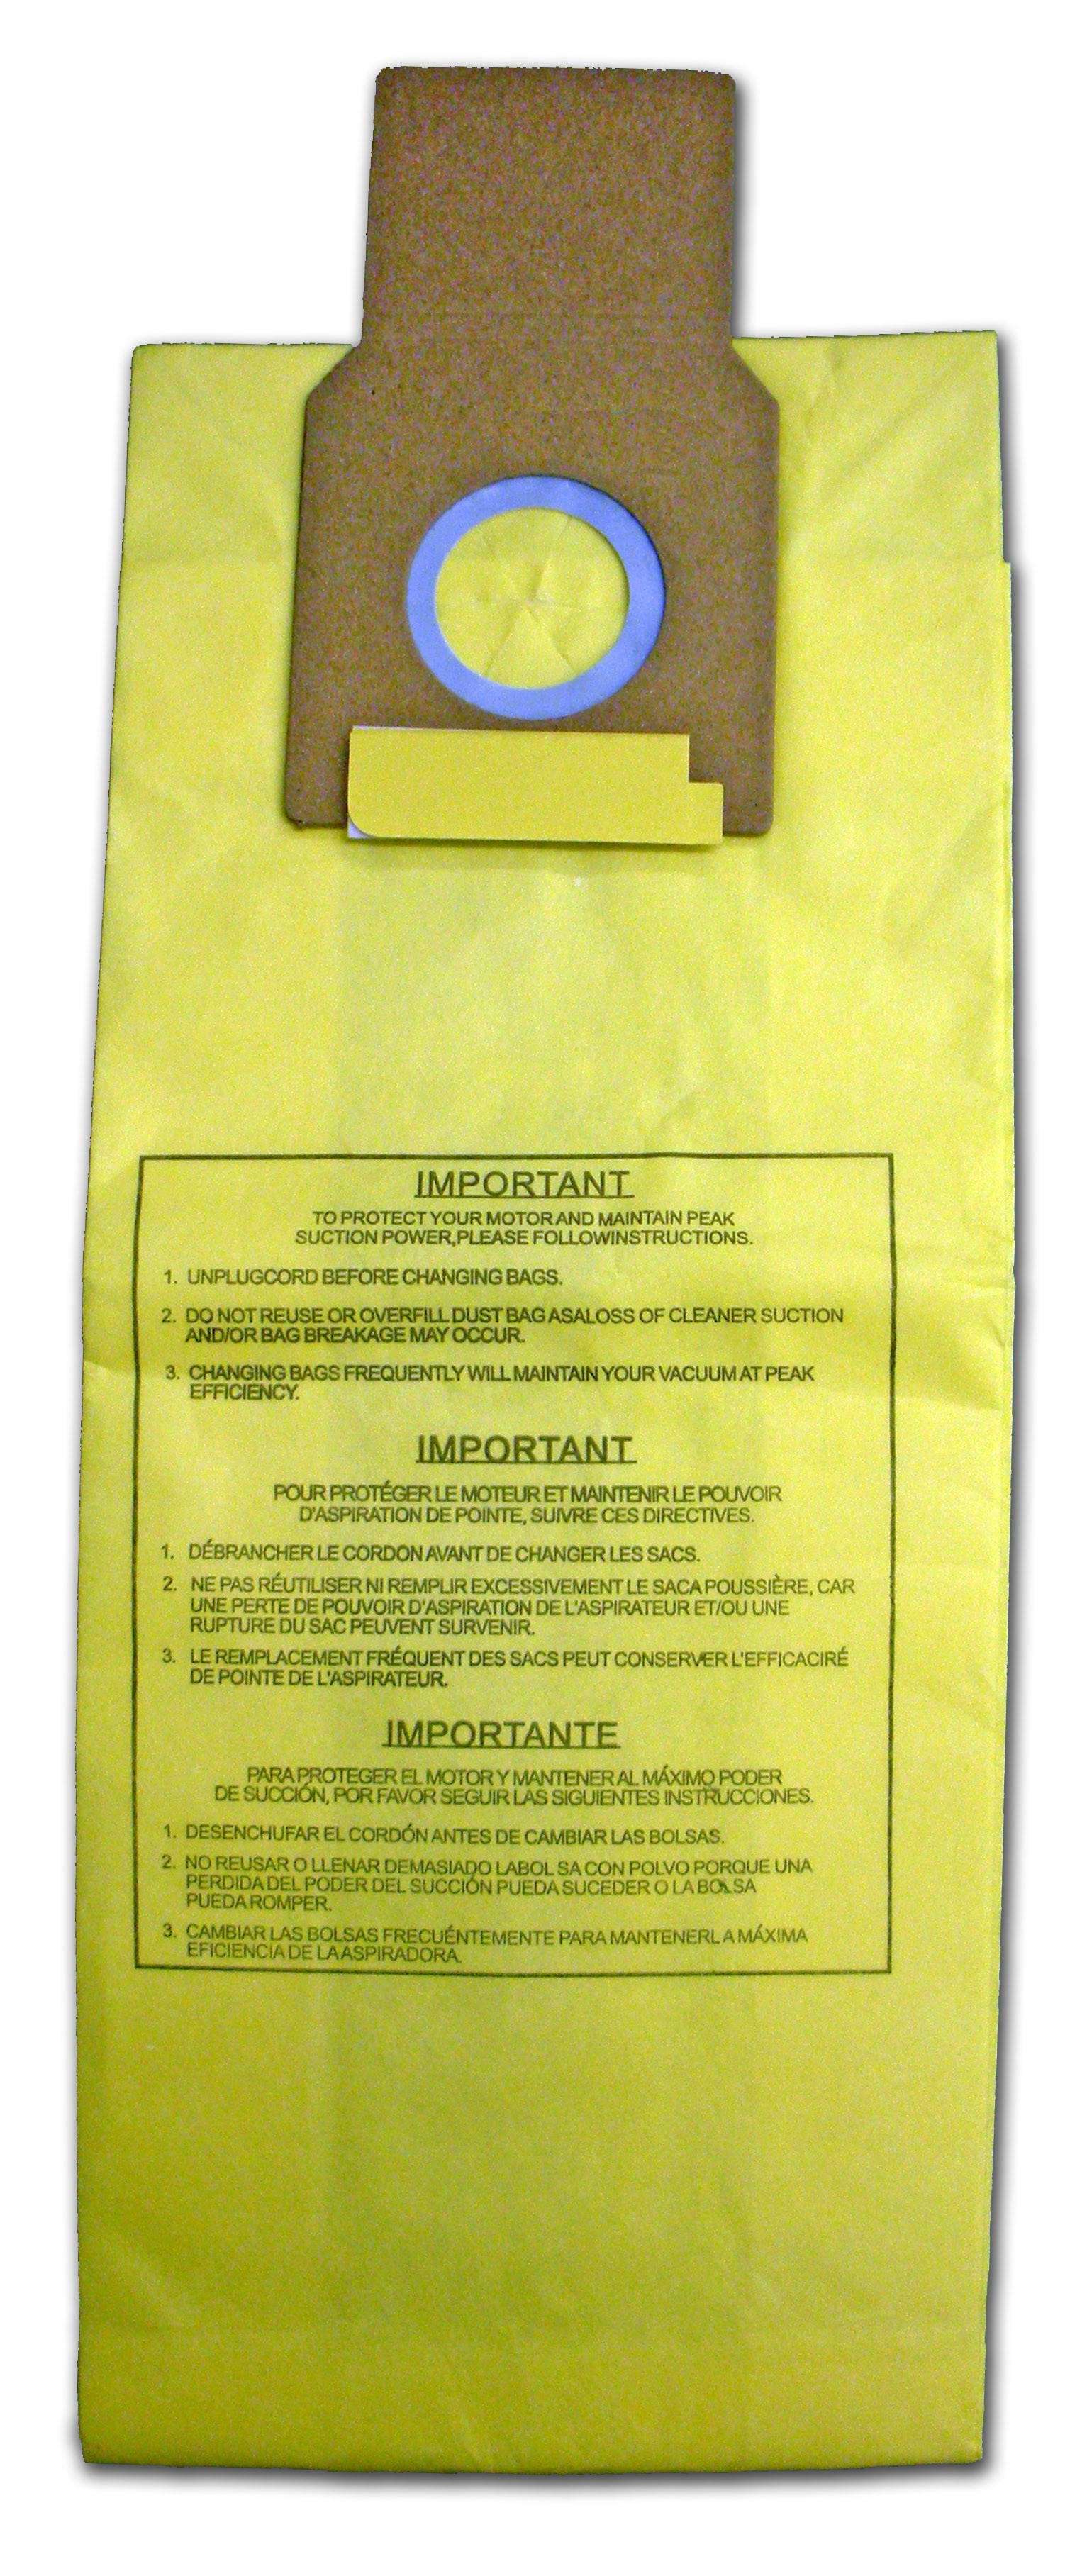 HOME CARE 20 For Upright Vacuum Cleaner Bags  50688 & 50690  Type U. ( 20 Total Bags). Made in the USA